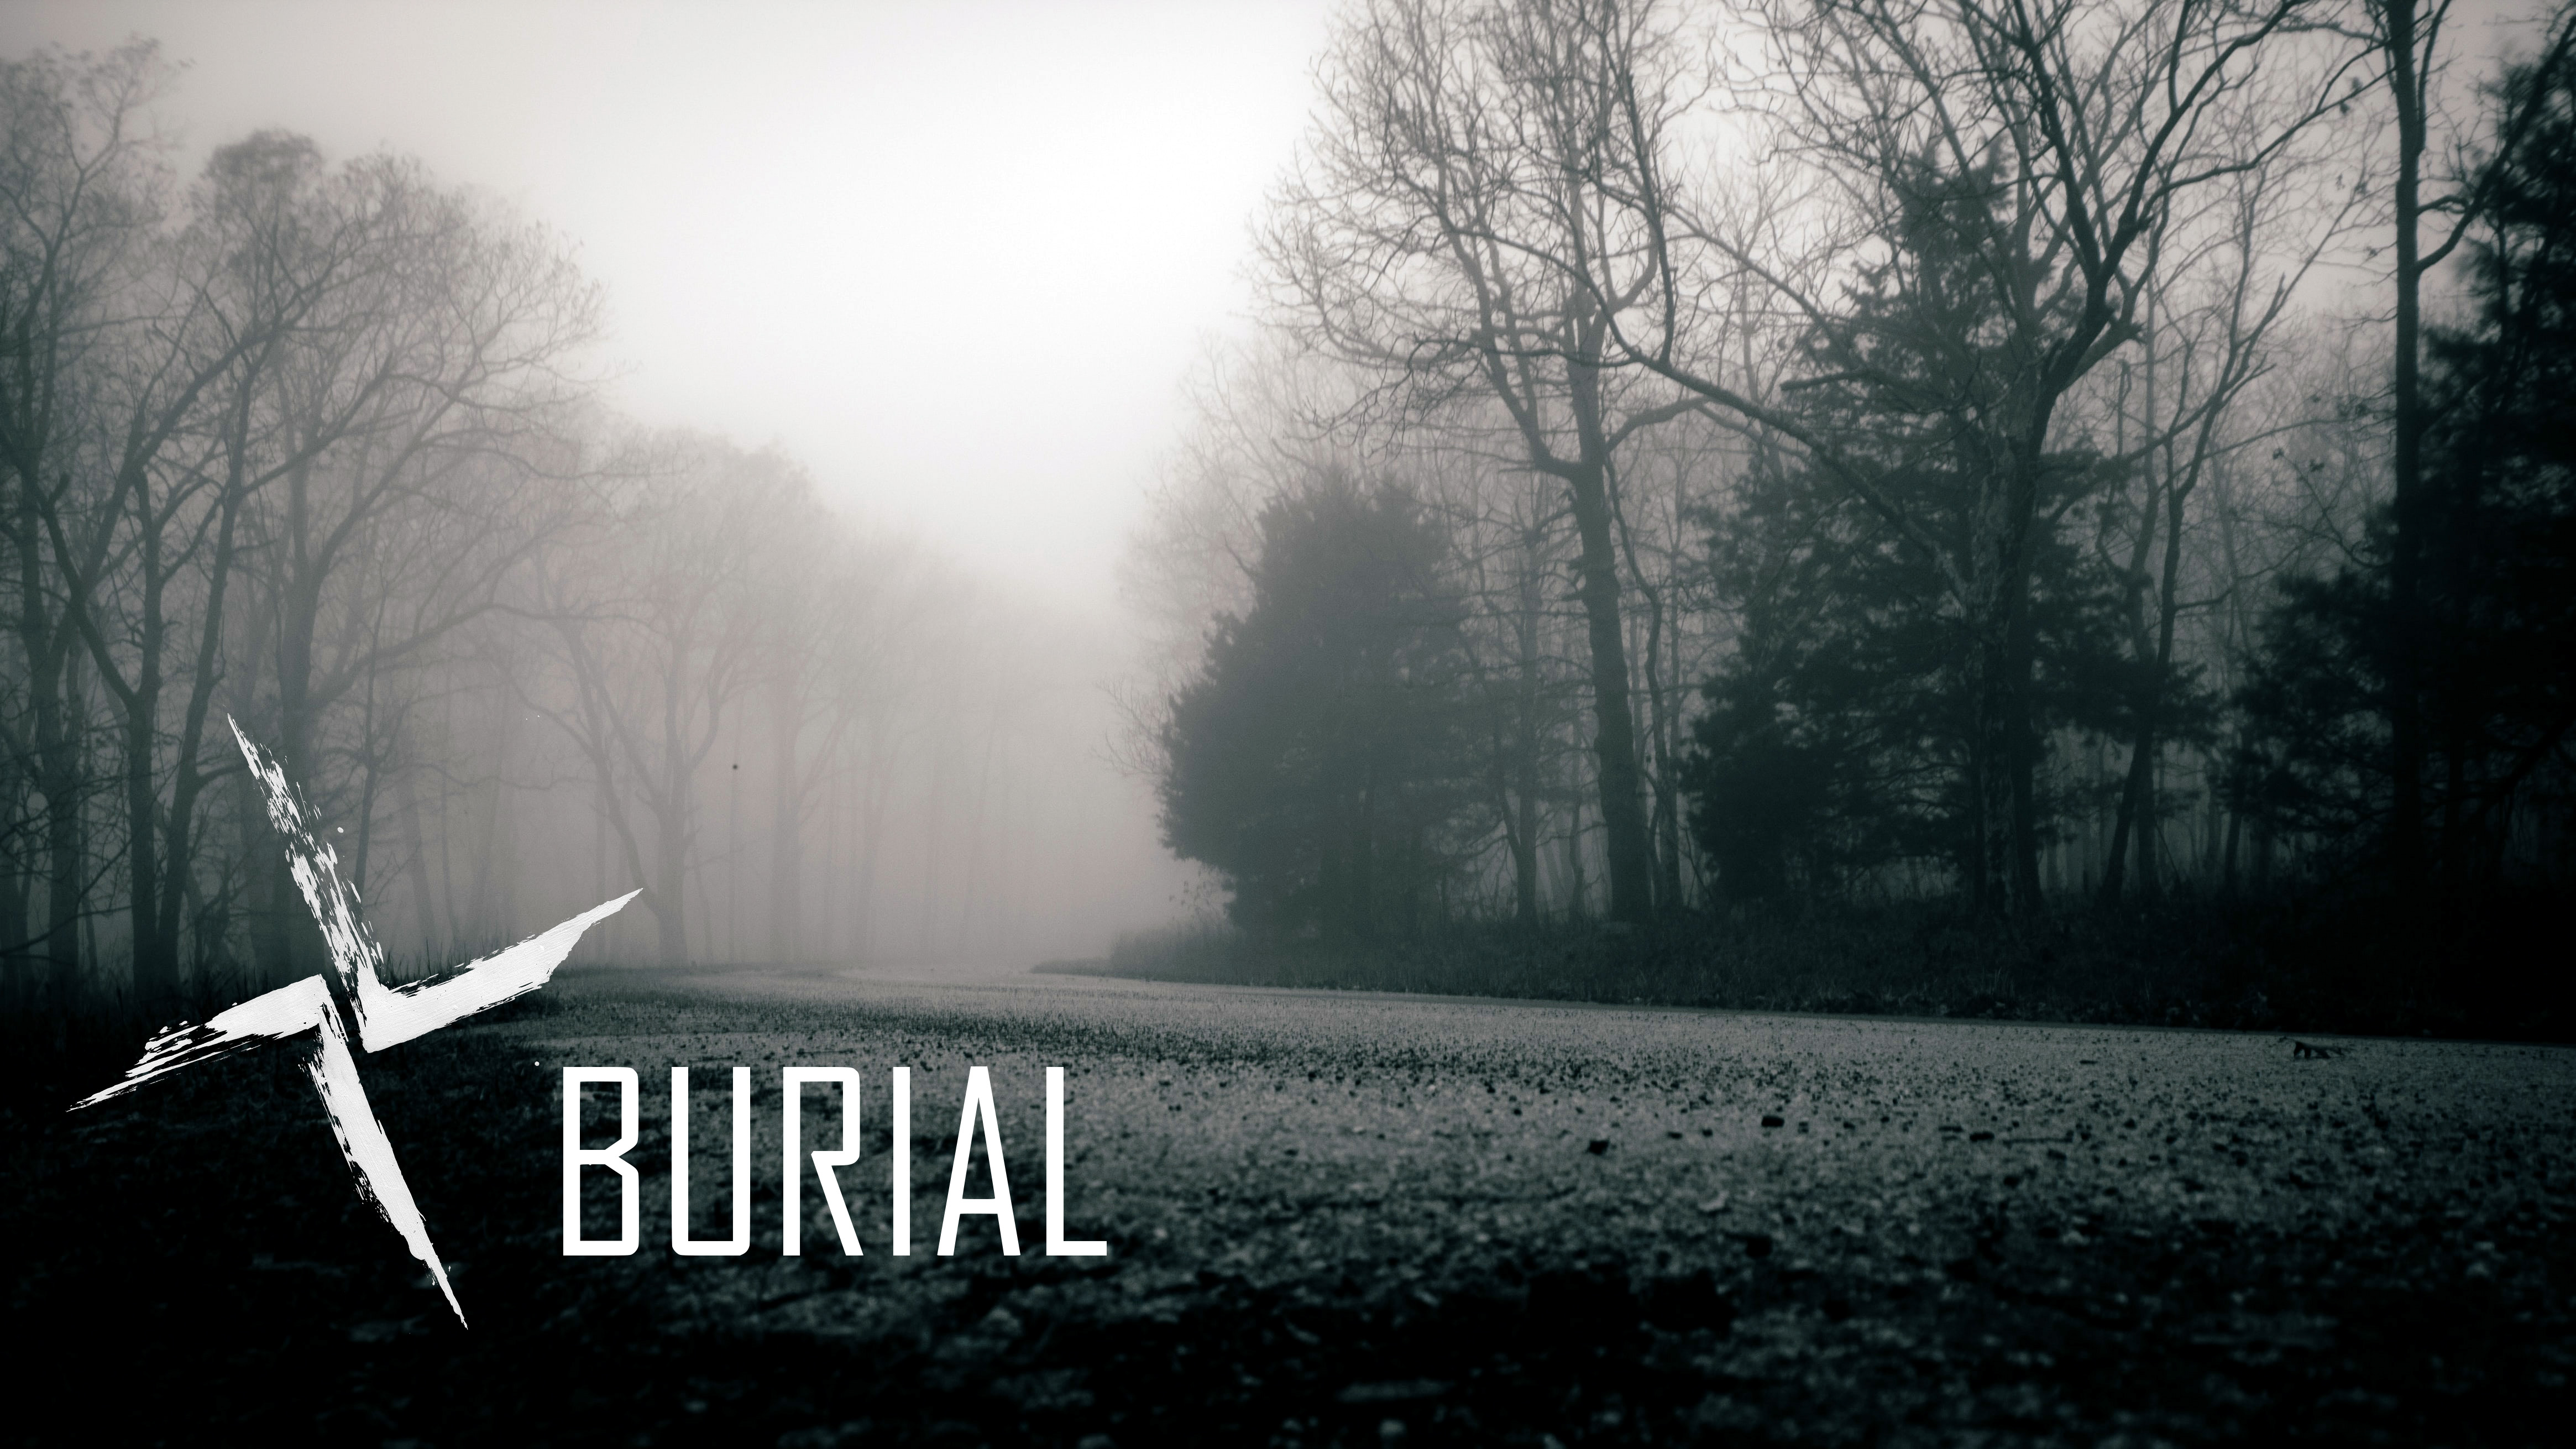 General 4660x2621 Burial logo electronic music dubstep road outdoors mist music monochrome low light